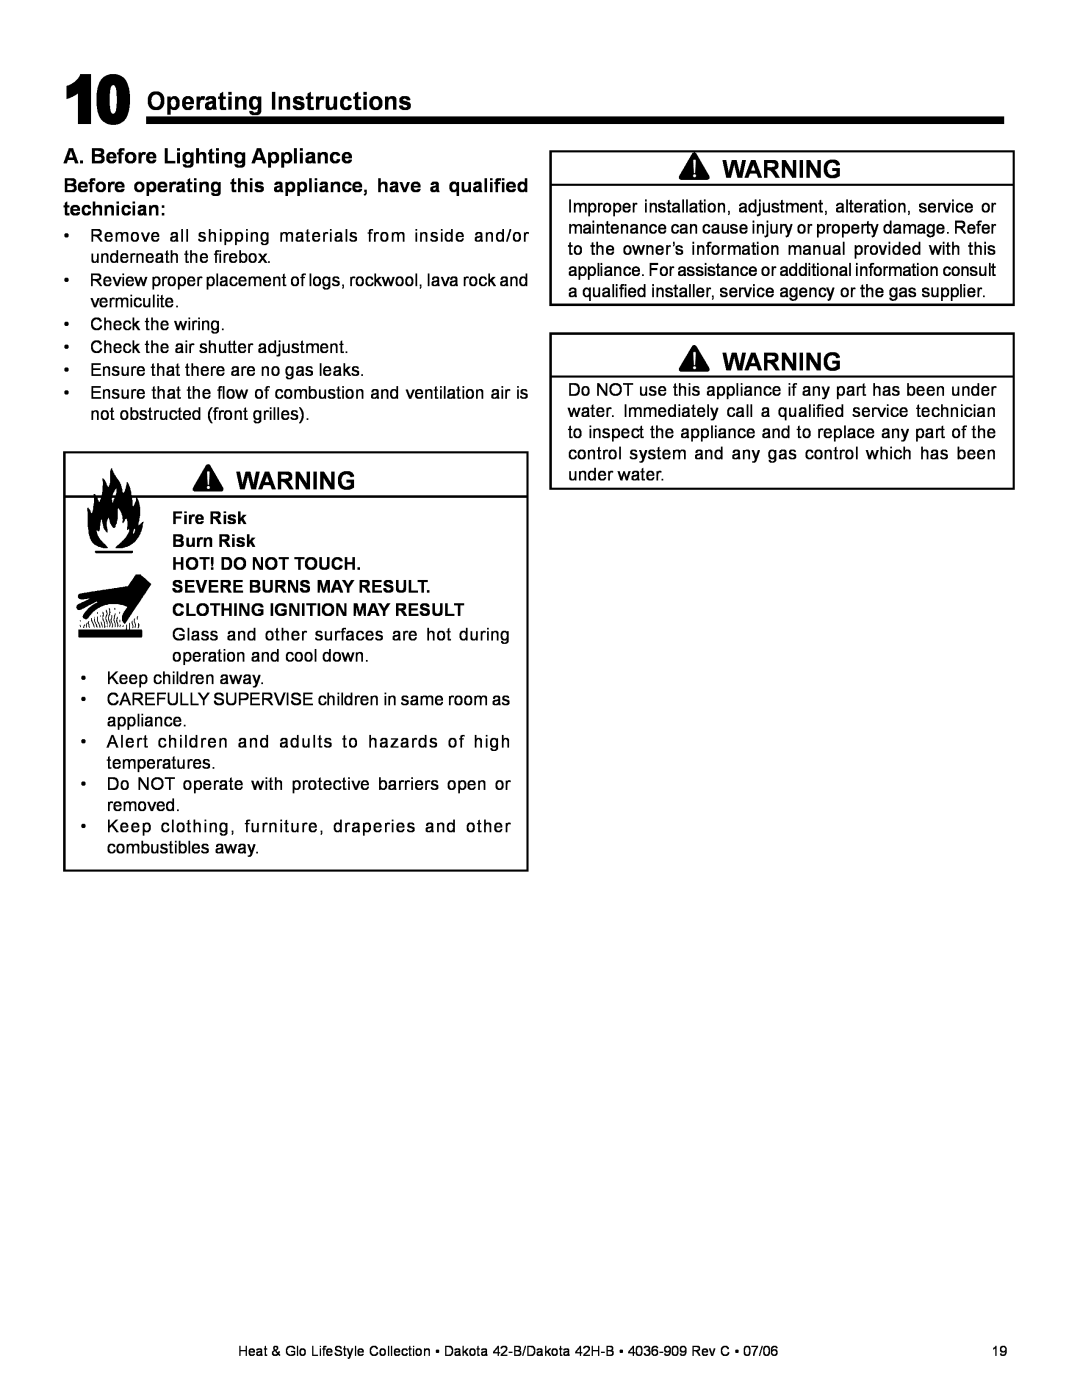 Heat & Glo LifeStyle Dakota 42-B owner manual Operating Instructions, A. Before Lighting Appliance, Severe Burns May Result 